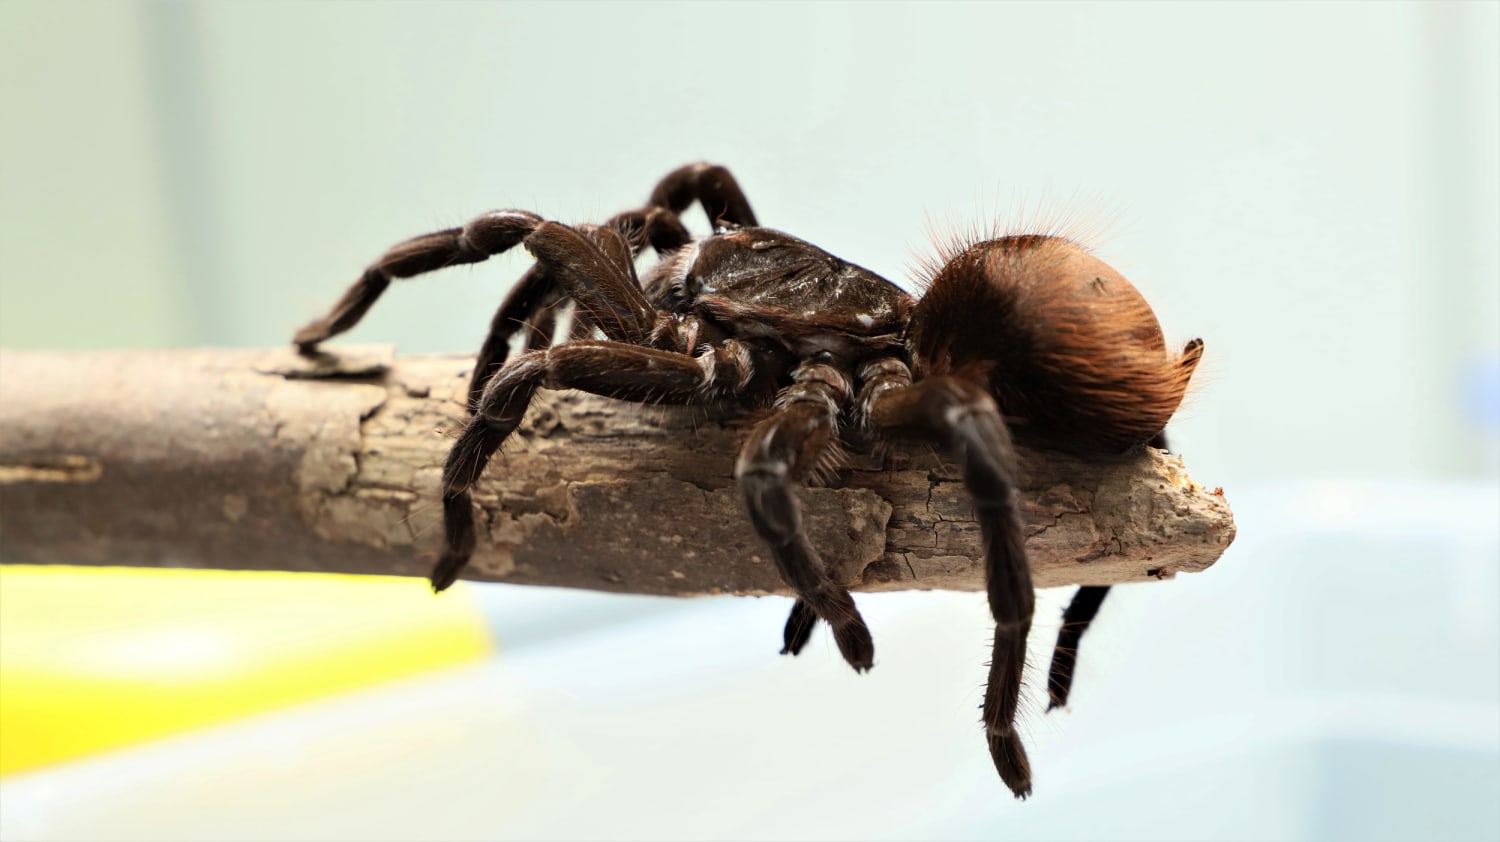 Colombia seizes hundreds of arachnids being illegally smuggled to Europe